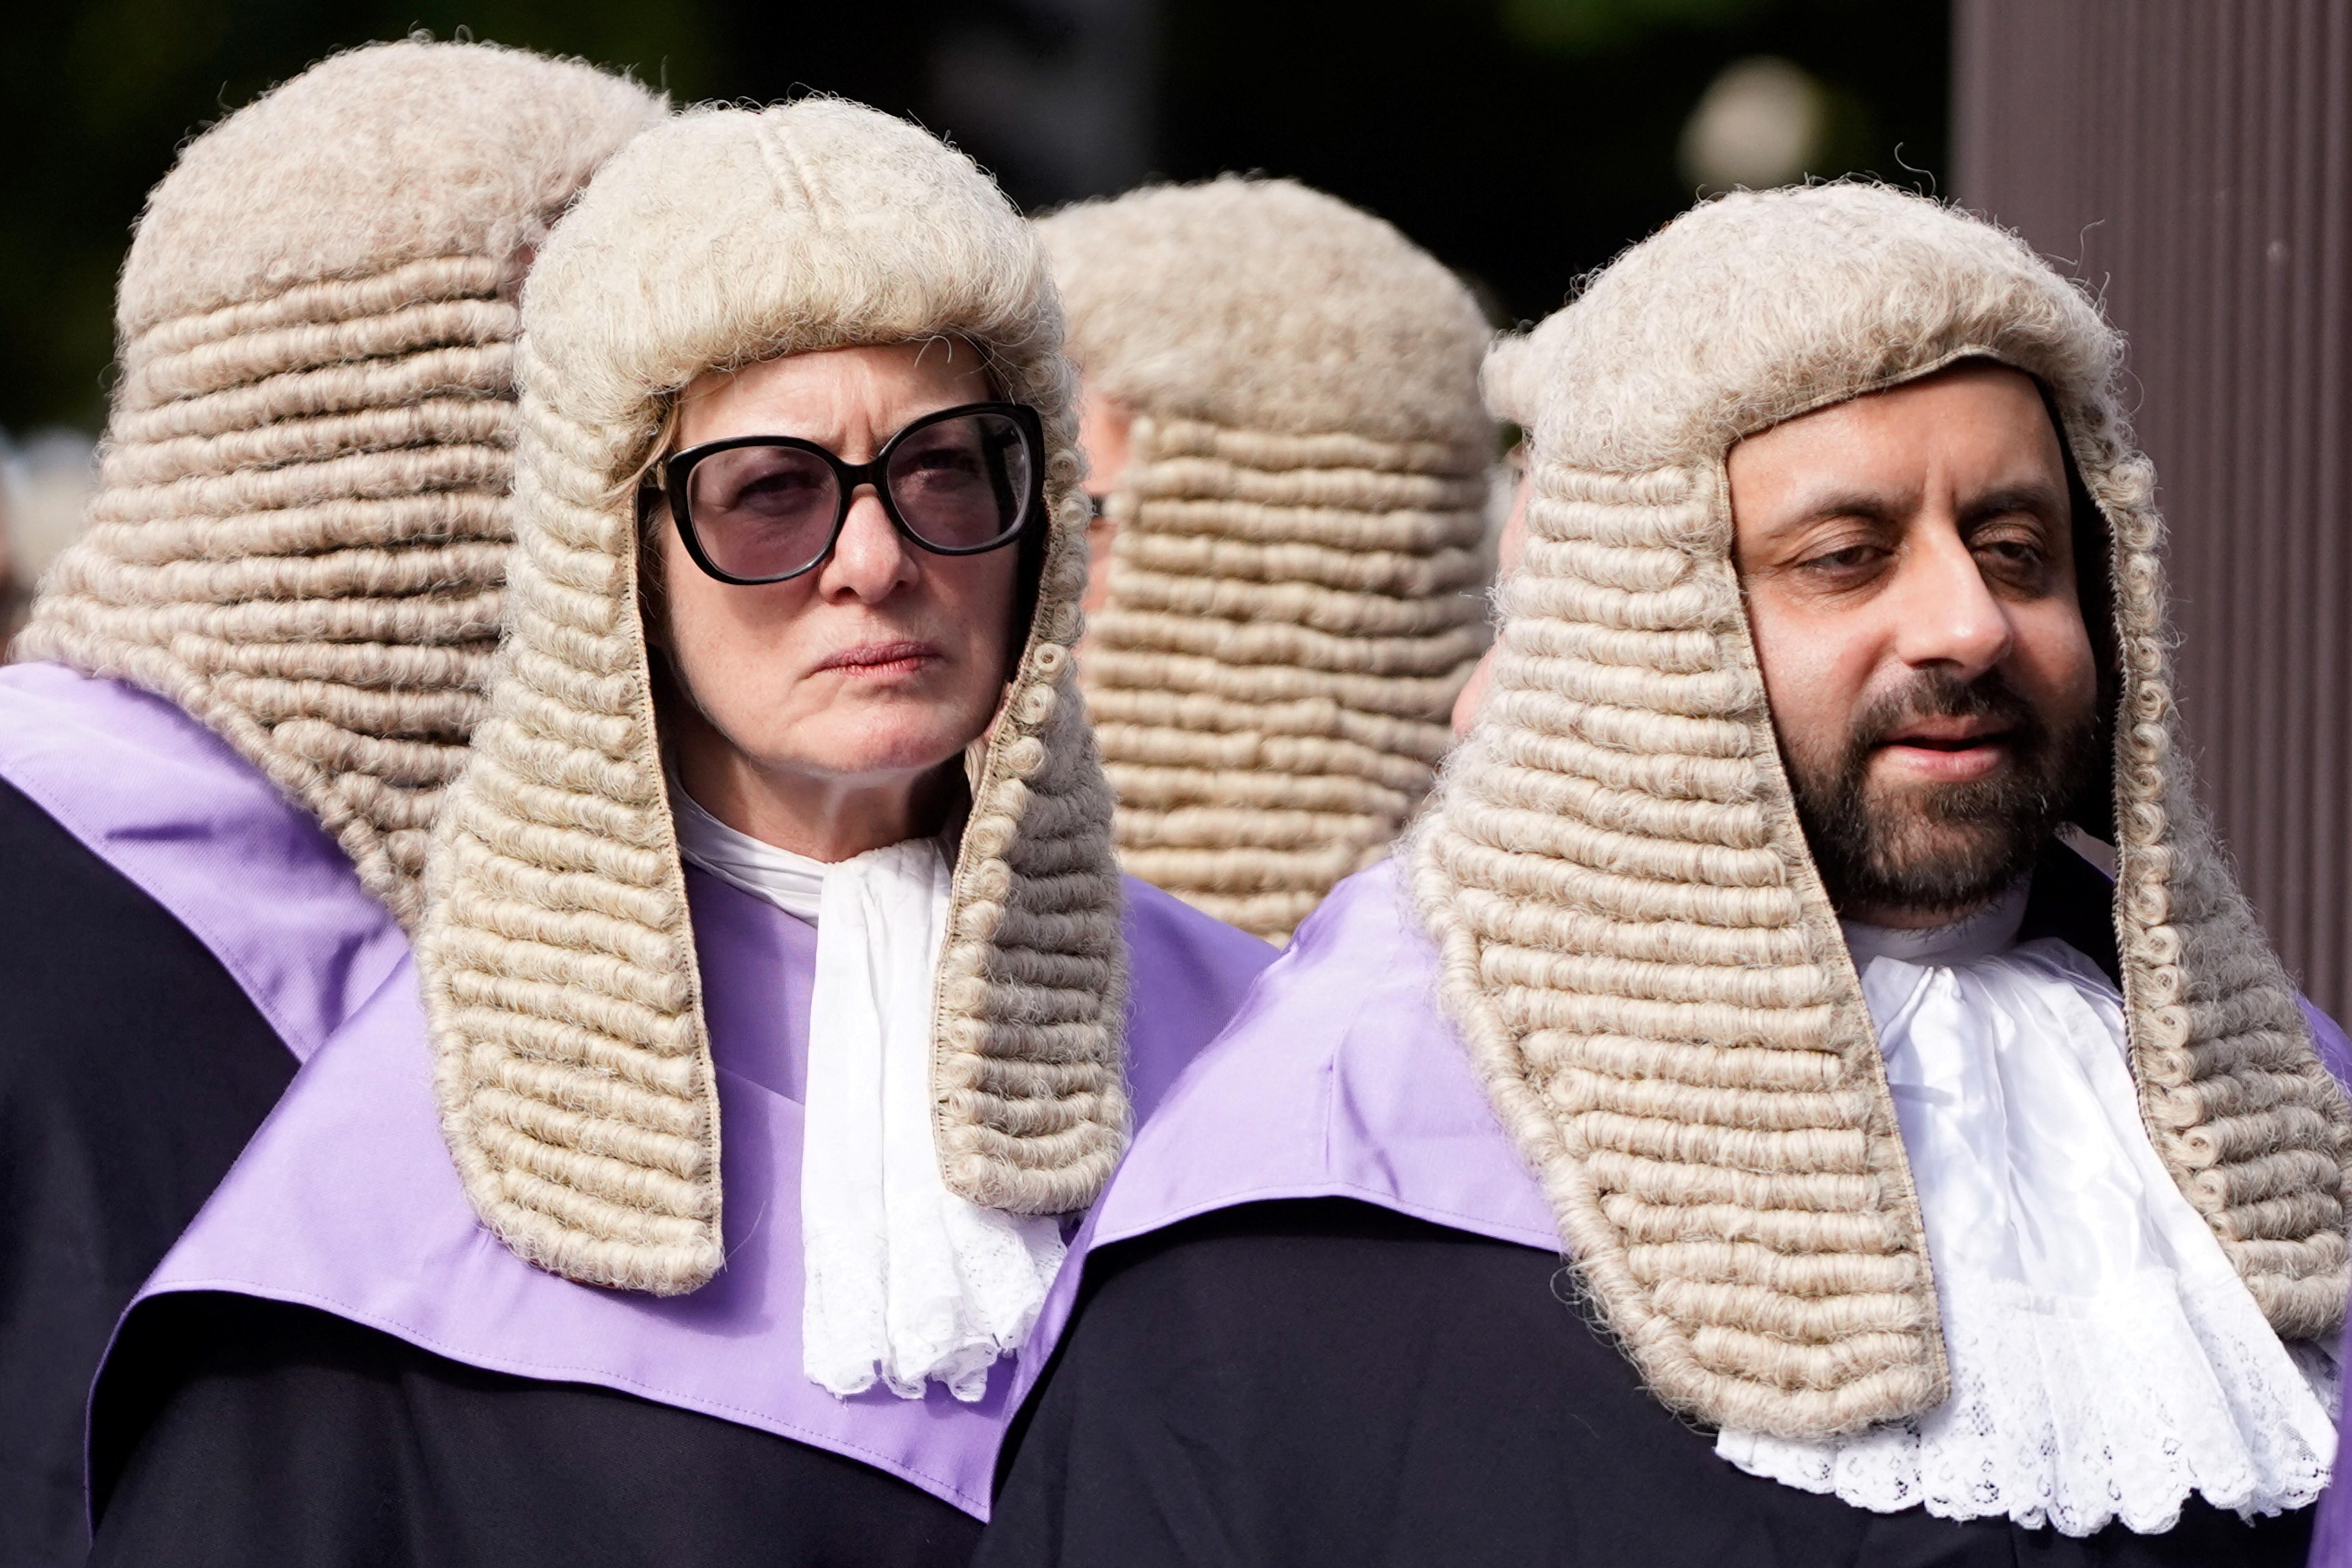 Judges process to the Palace of Westminster in central London, as part of a tradition to mark the start of the new legal year, on October 3, 2022. One lady in a barrister/English judge wig wearing sunglasses and scowling, next to bearded dude in the barrister/English judge wig grinning.